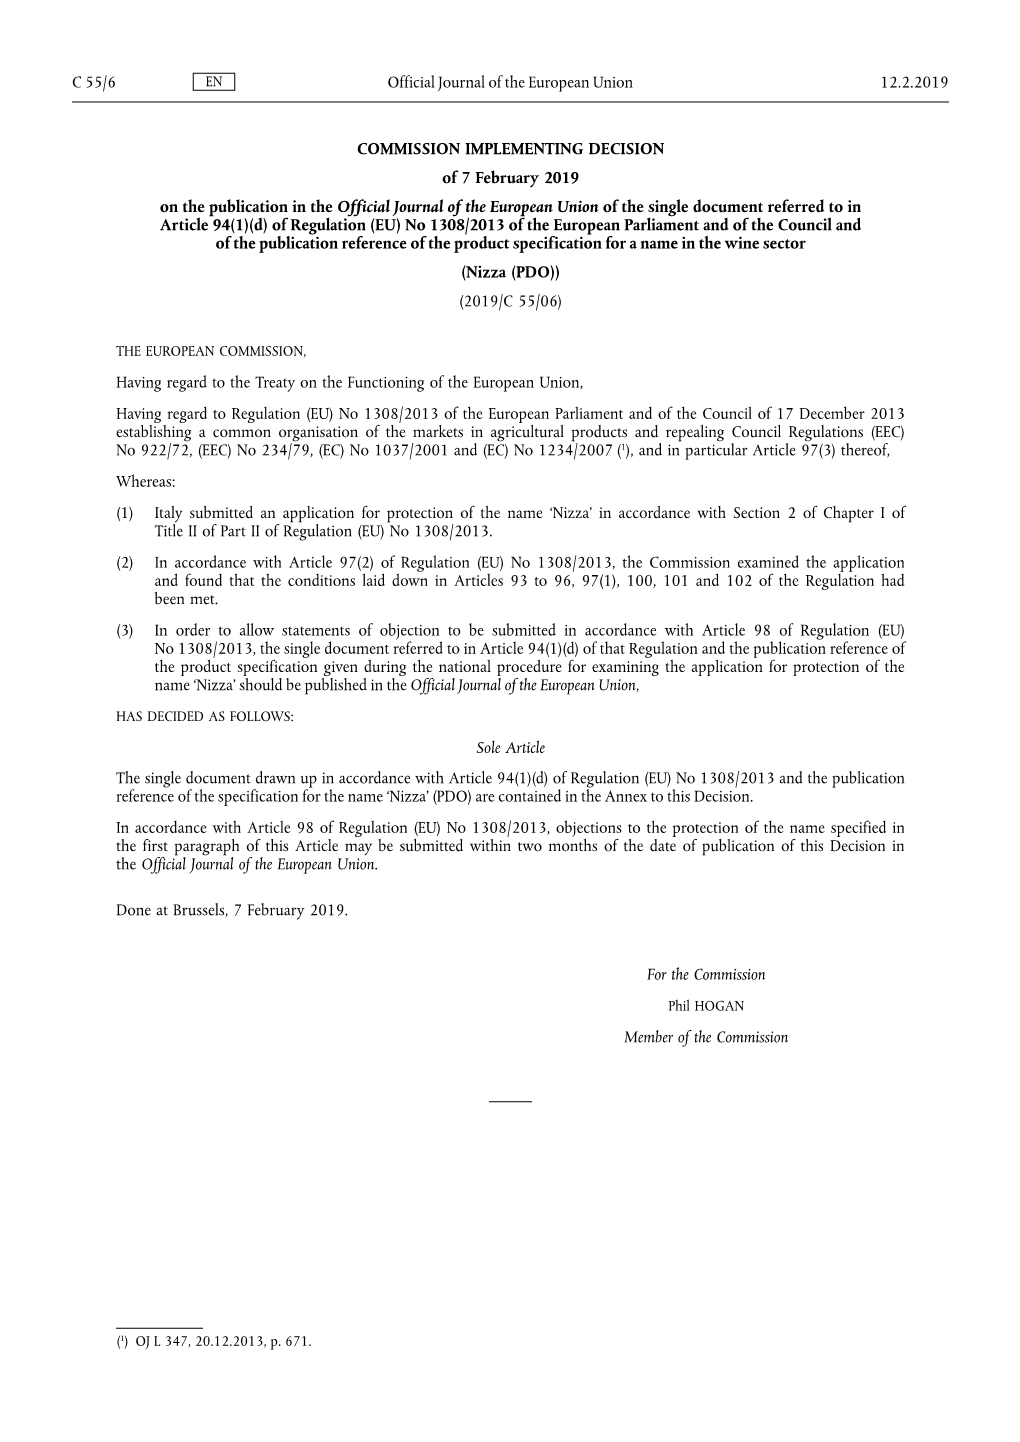 Commission Implementing Decision of 7 February 2019 on the Publication